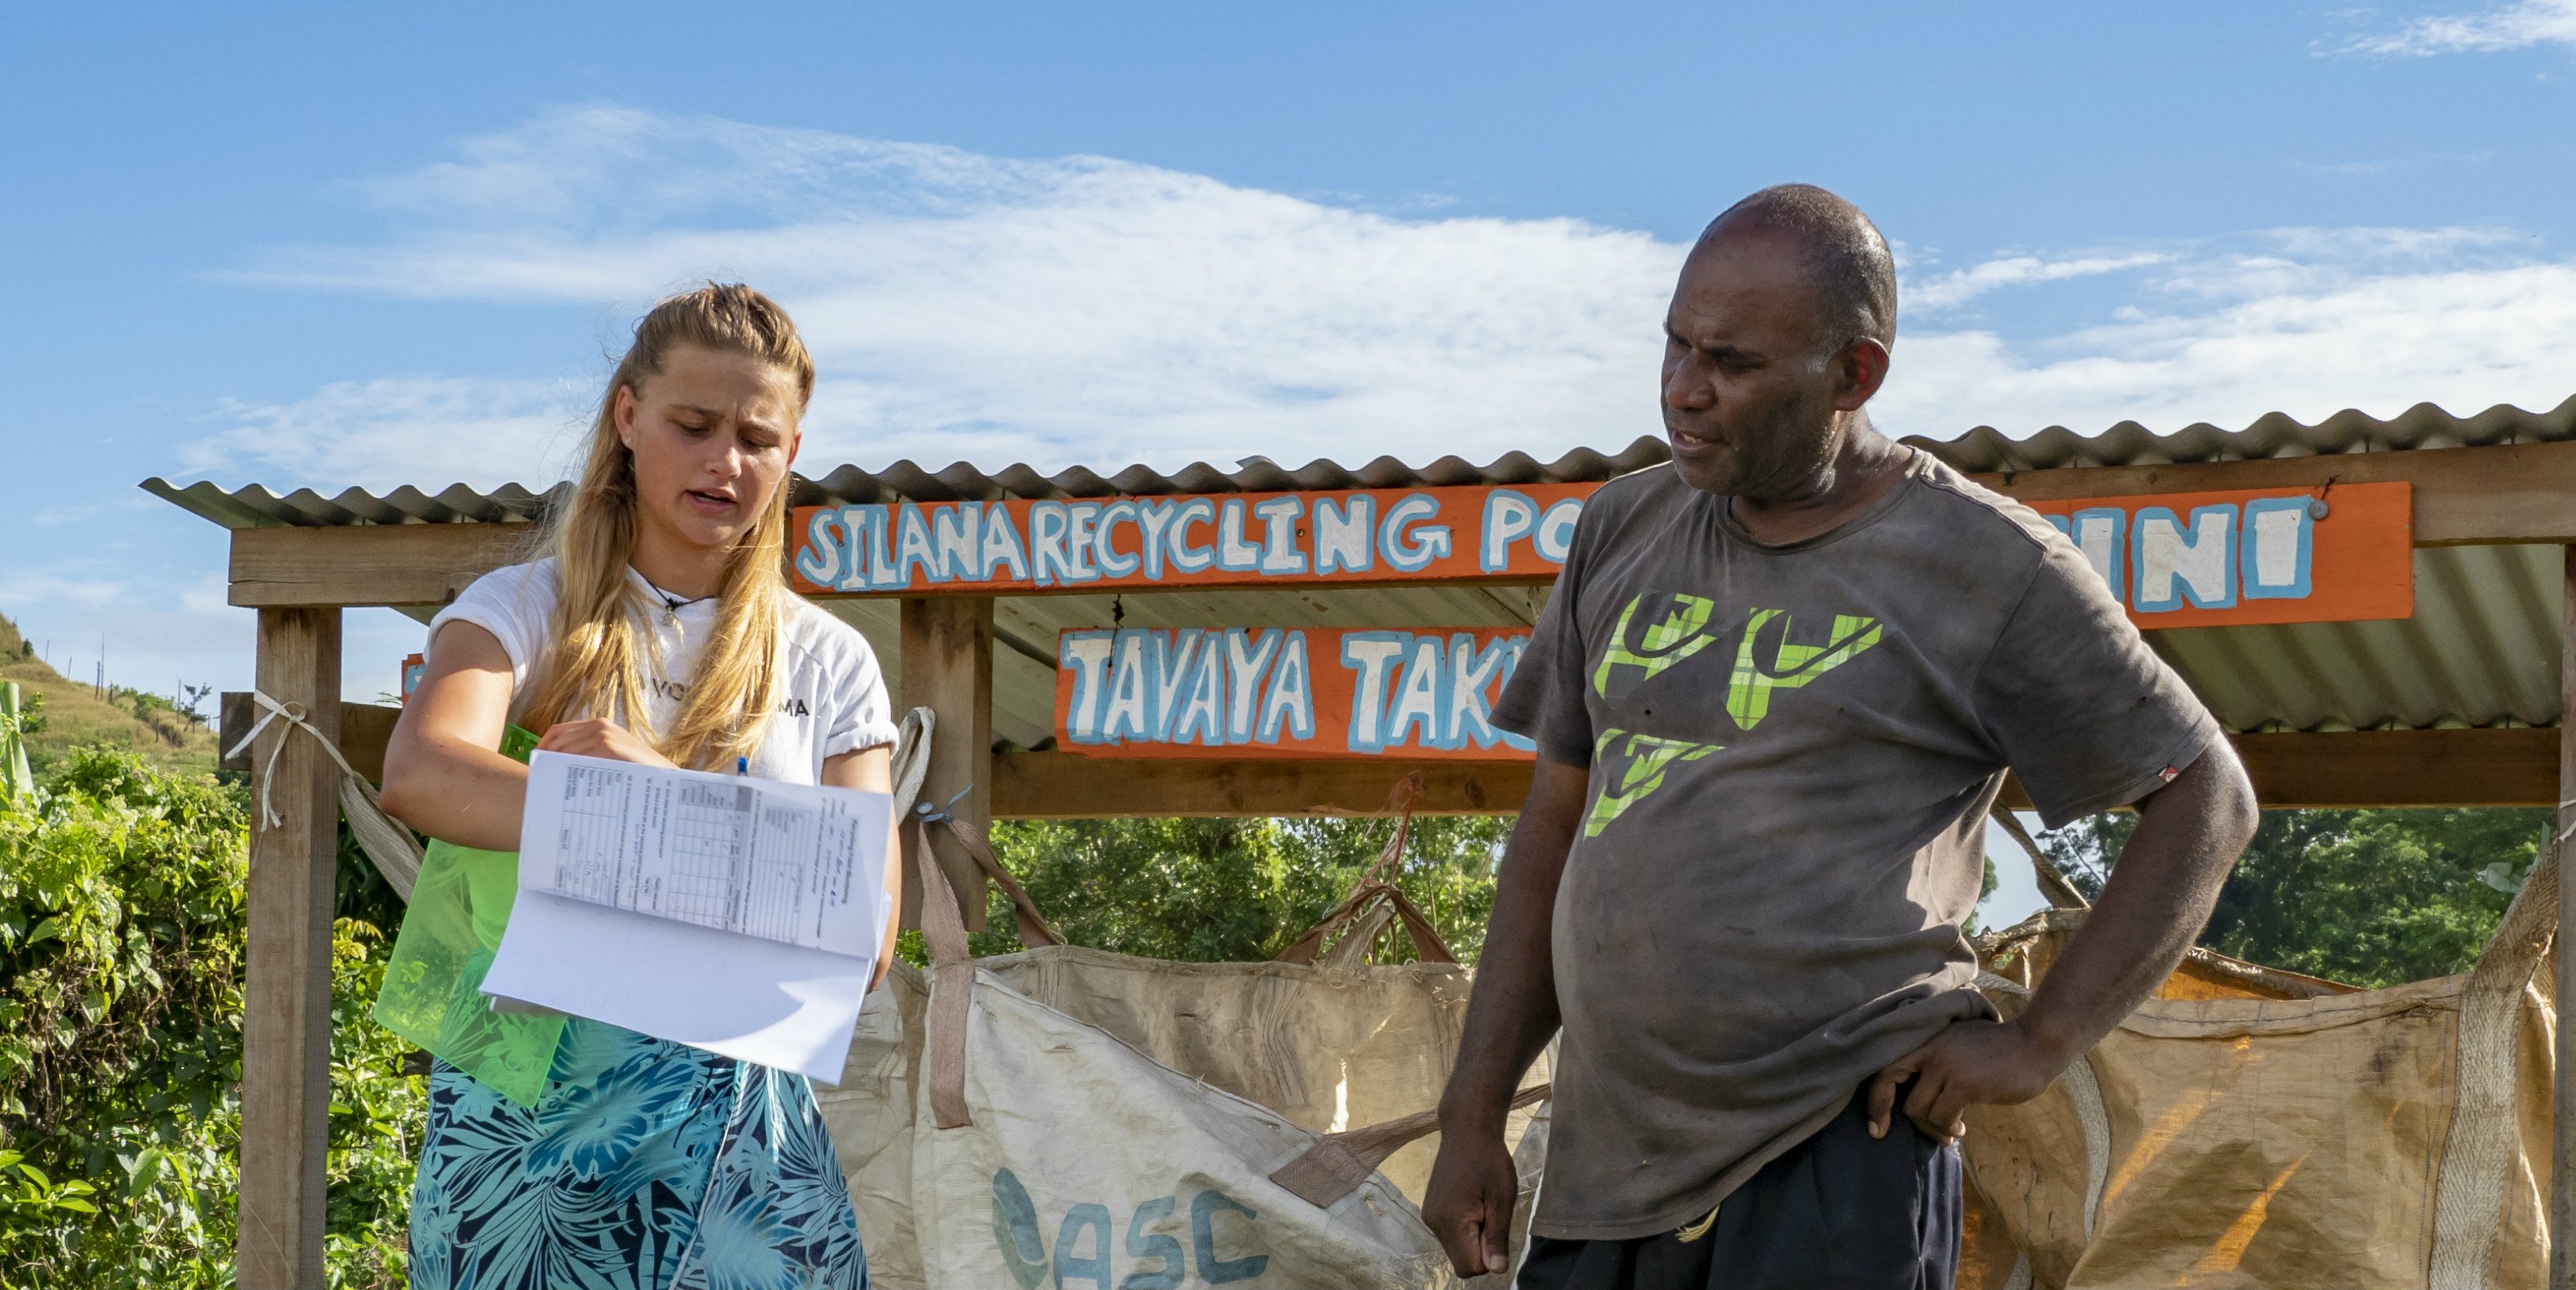 A GVI participant collaborates with a local community member on a recycling program. Being a global citizen involves genuine engagement with local communities.